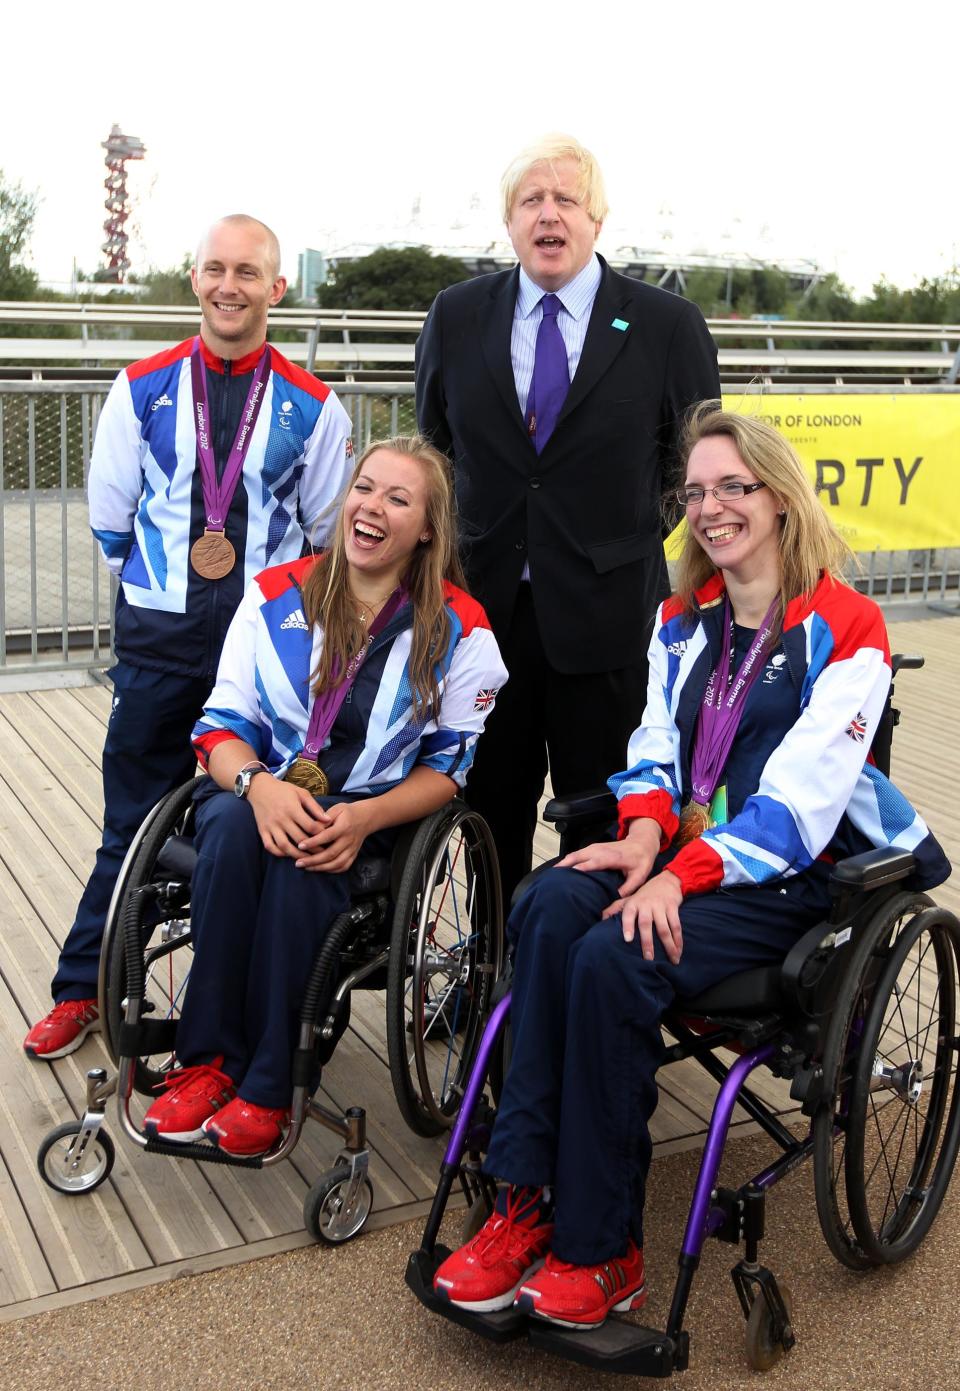 Mayor of London Boris Johnson with Ben Quilter (left) Hannah Cockcroft (2nd left) and Sophie Christiansen (right) at the National Paralympic Day in the Queen Elizabeth Olympic park in Stratford, where he was presented the Paralympic order by the International Paralympic committee. PRESS ASSOCIATION Photo. Picture date: Saturday September 7, 2013. See PA story SPORT Paralympics. Photo credit should read: Sean Dempsey/PA Wire